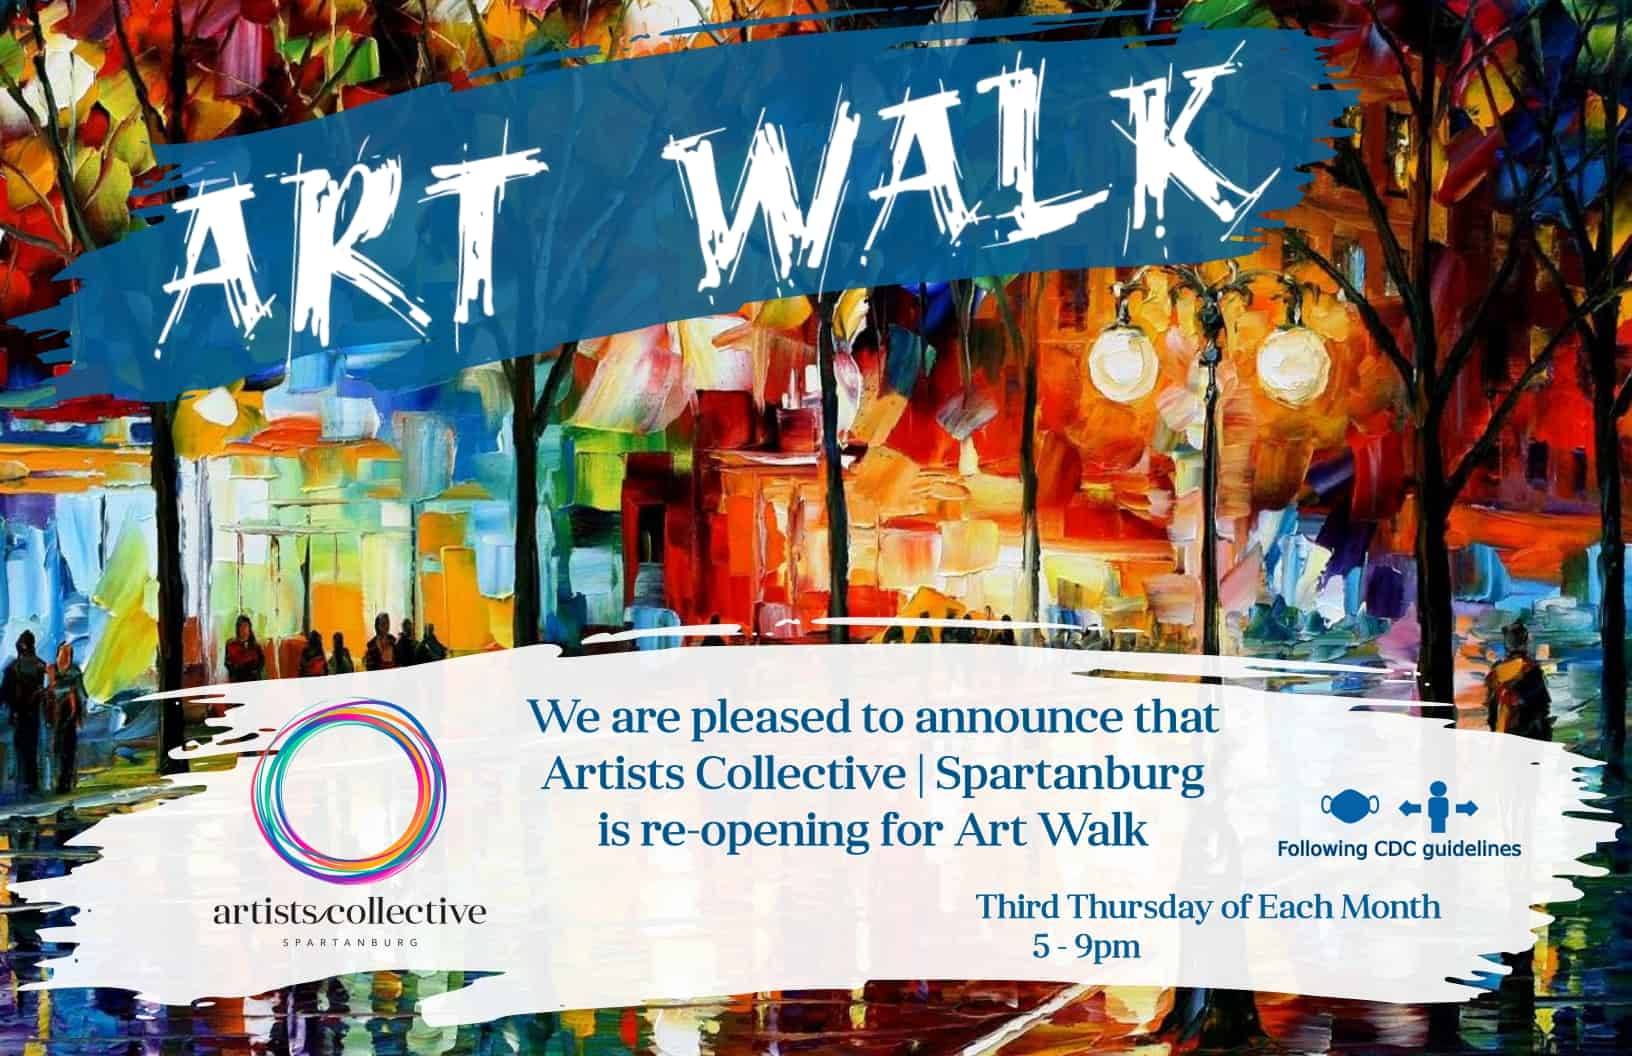 Artists Collective Spartanburg is re-opening for Art Walk in May